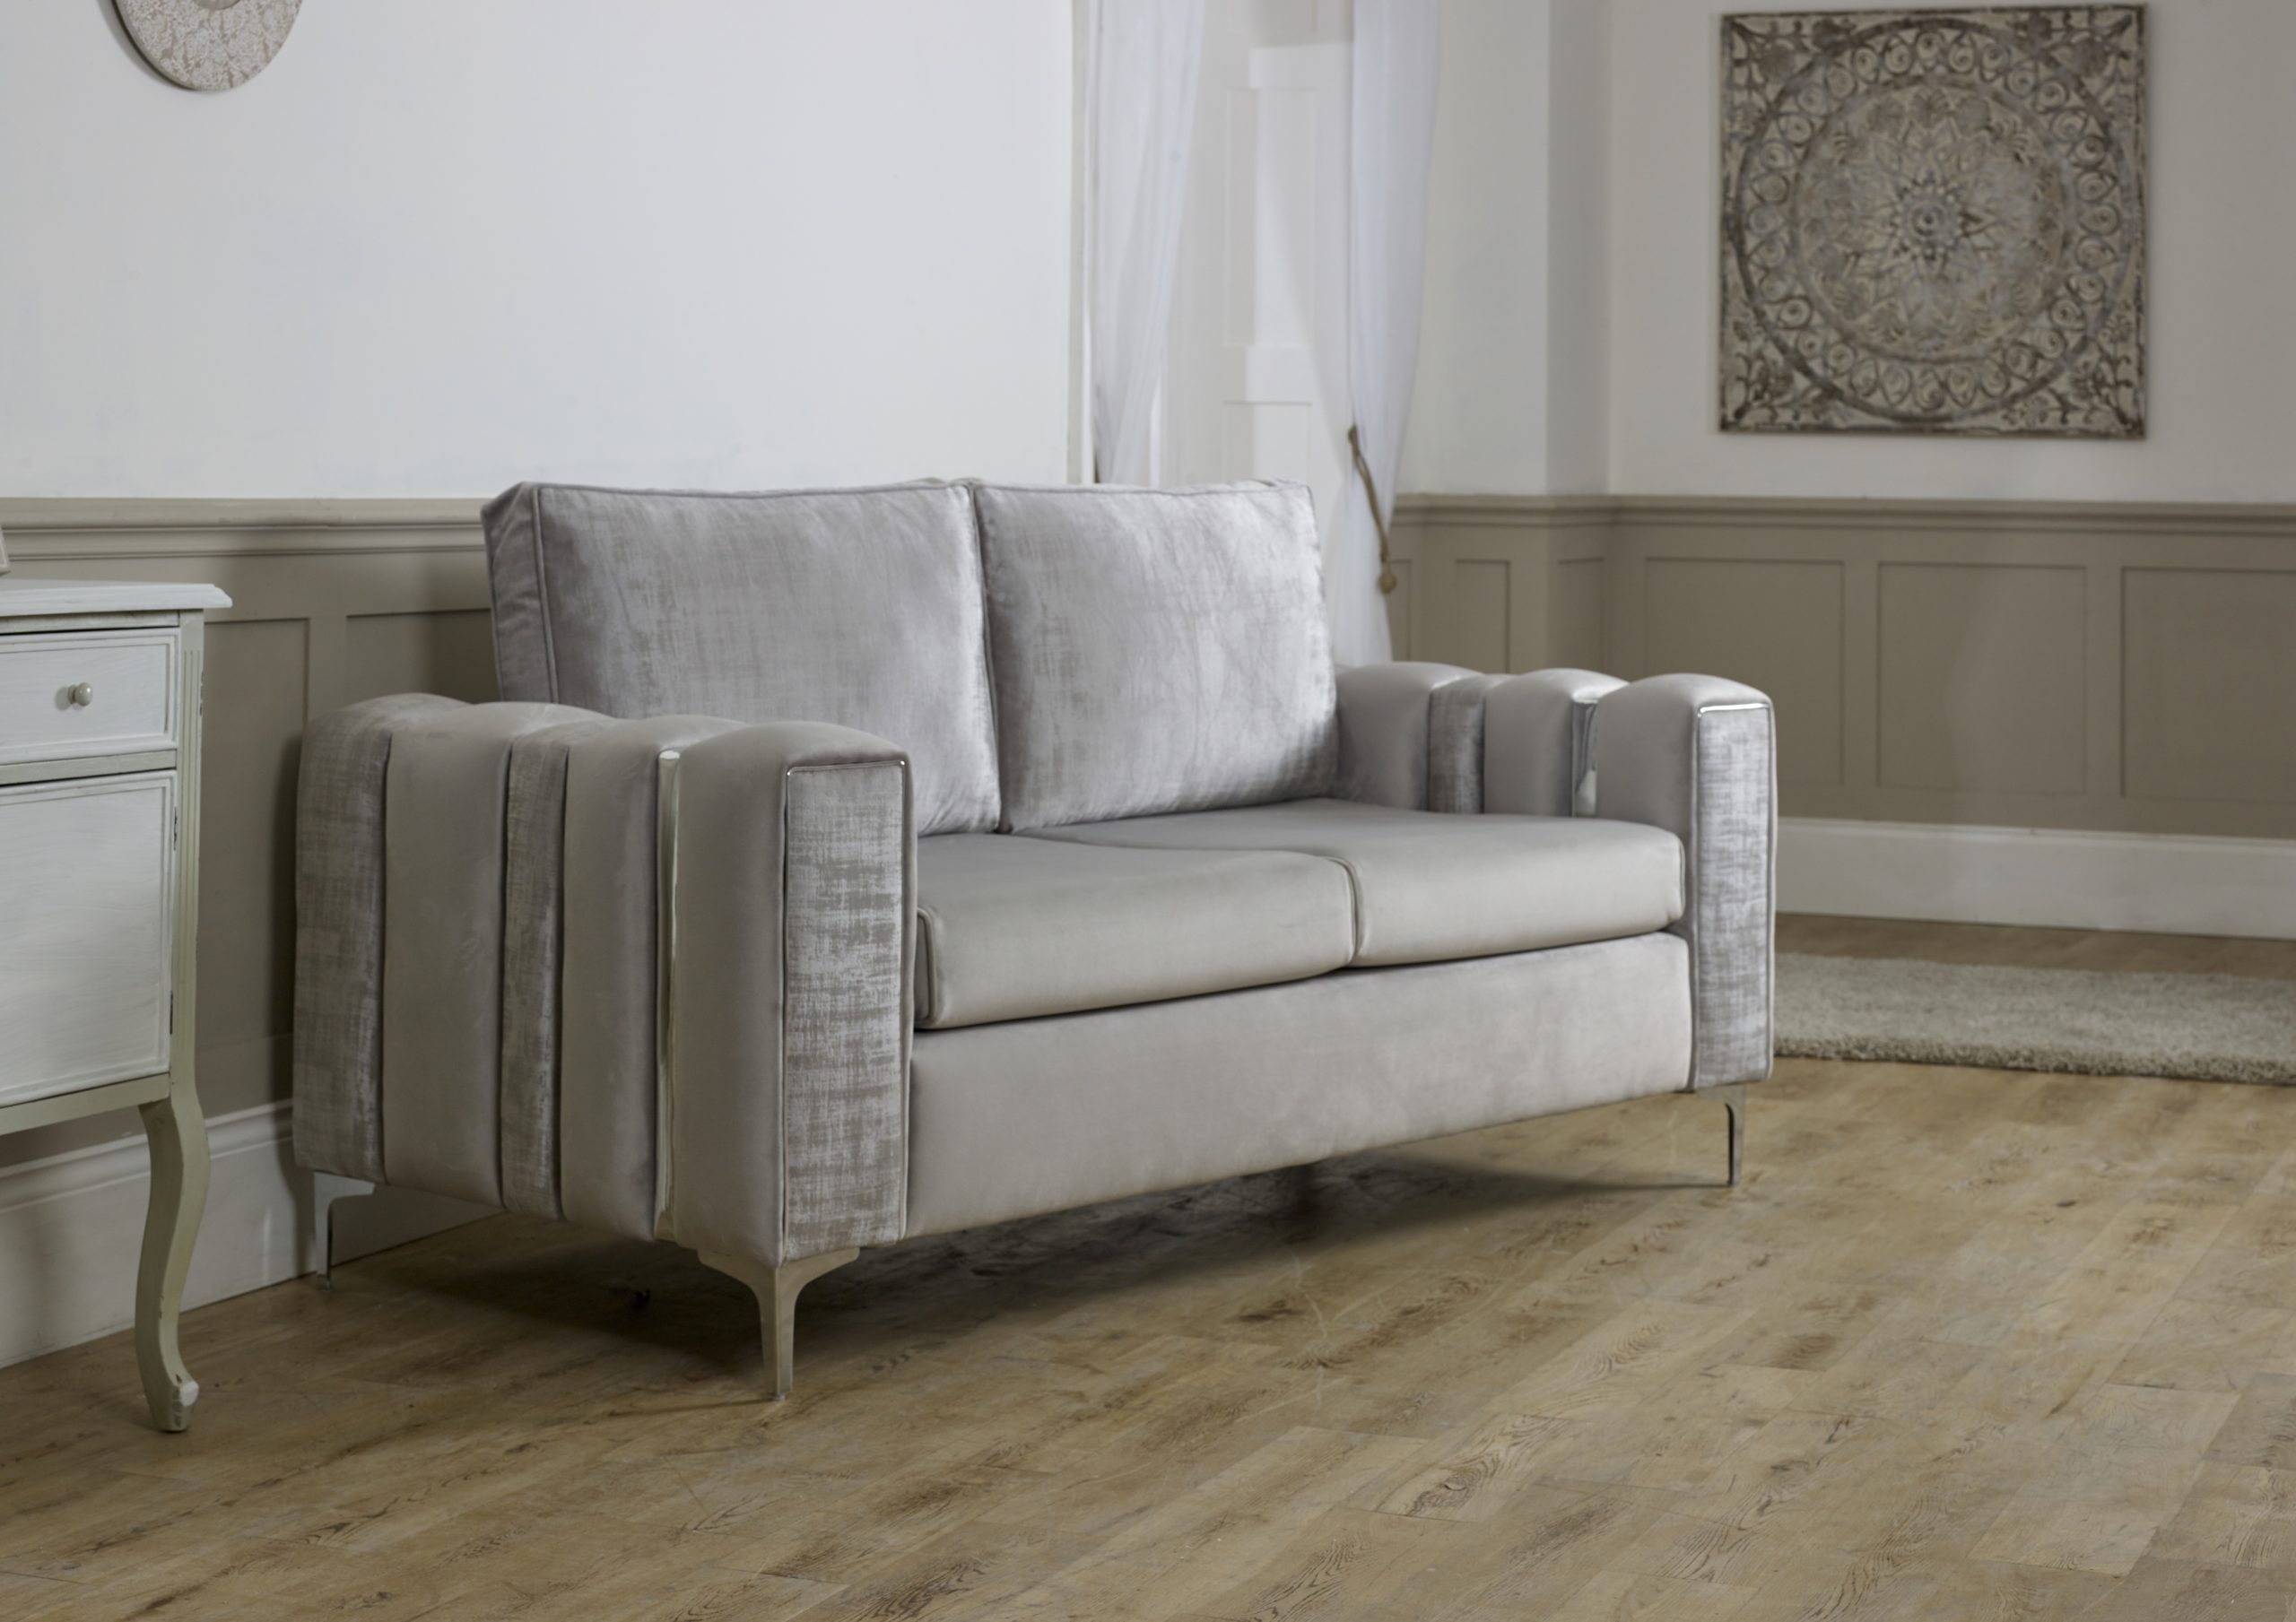 Meeble Sofa - H and M Living